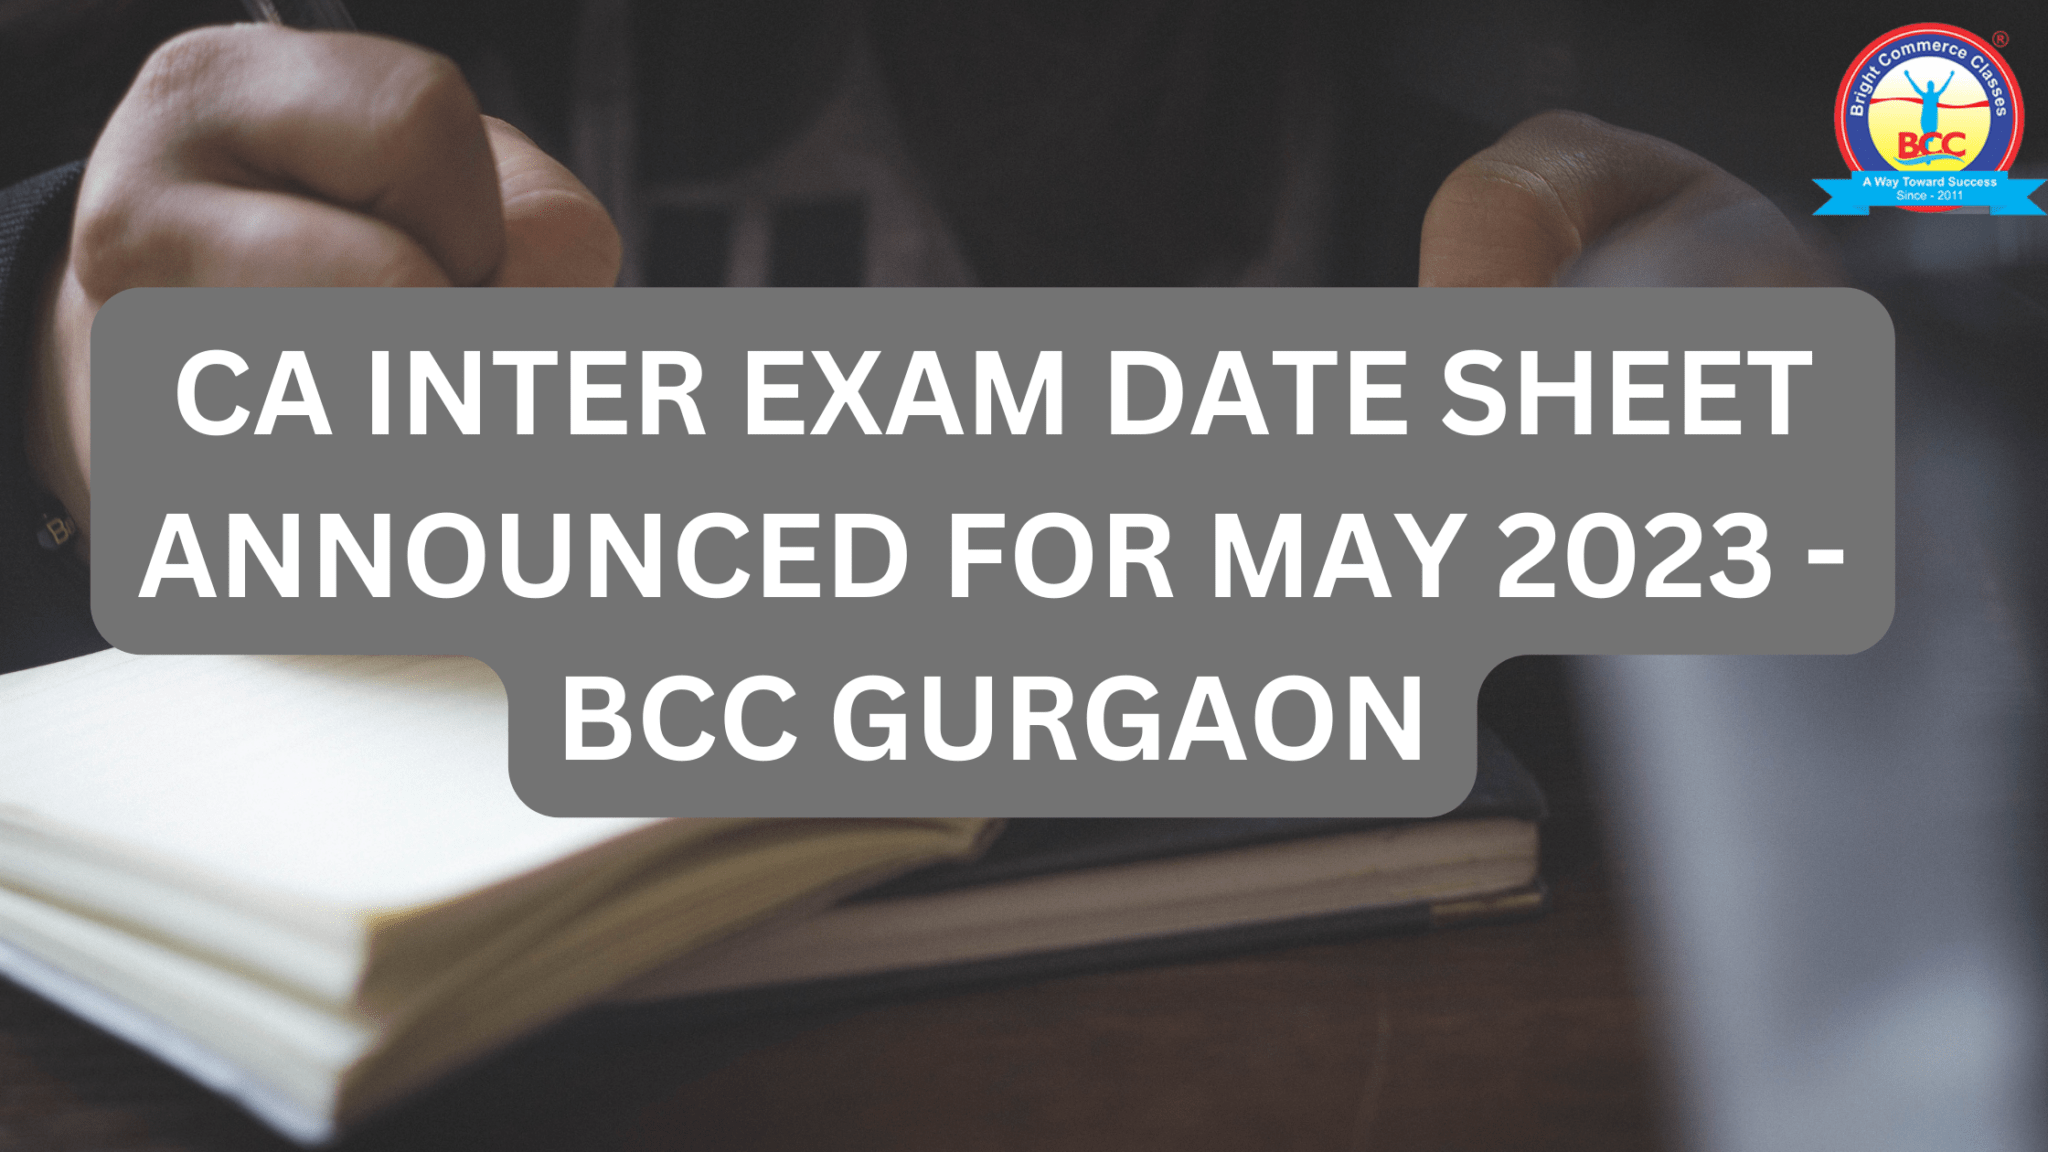 CA INTER EXAM DATE SHEET ANNOUNCED FOR MAY 2023 BCC Gurgaon